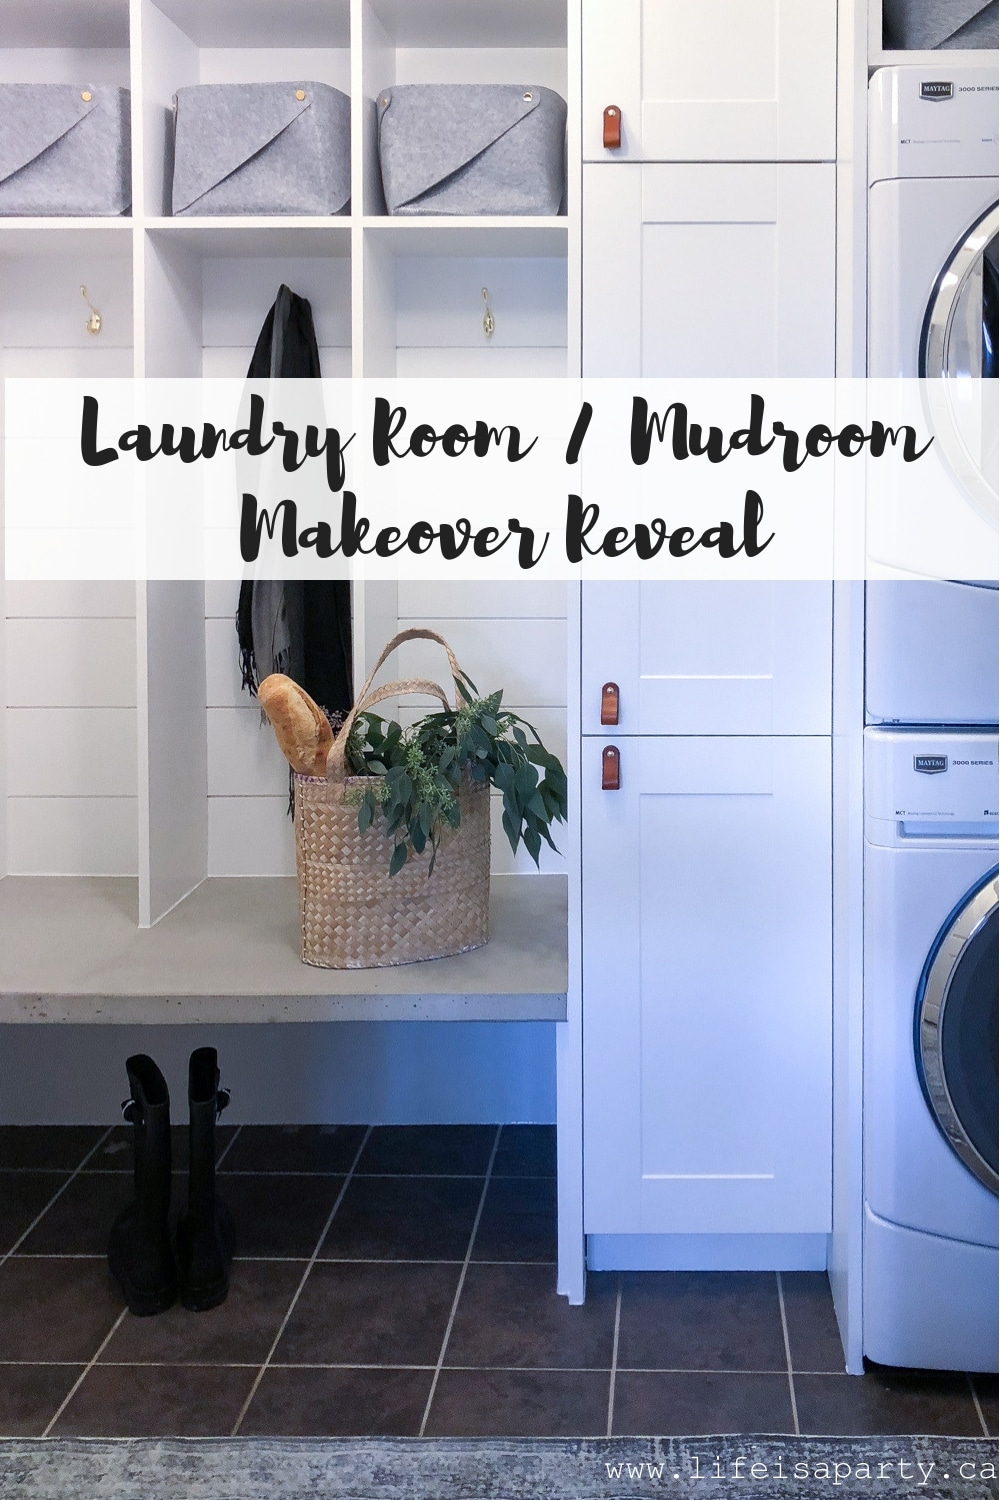 Laundry Room / Mudroom Makeover Reveal: From a chaotic and messy space to an organized and beautiful one with built-in lockers and storage solutions, shiplap, concrete, leather, brass and wood accents.